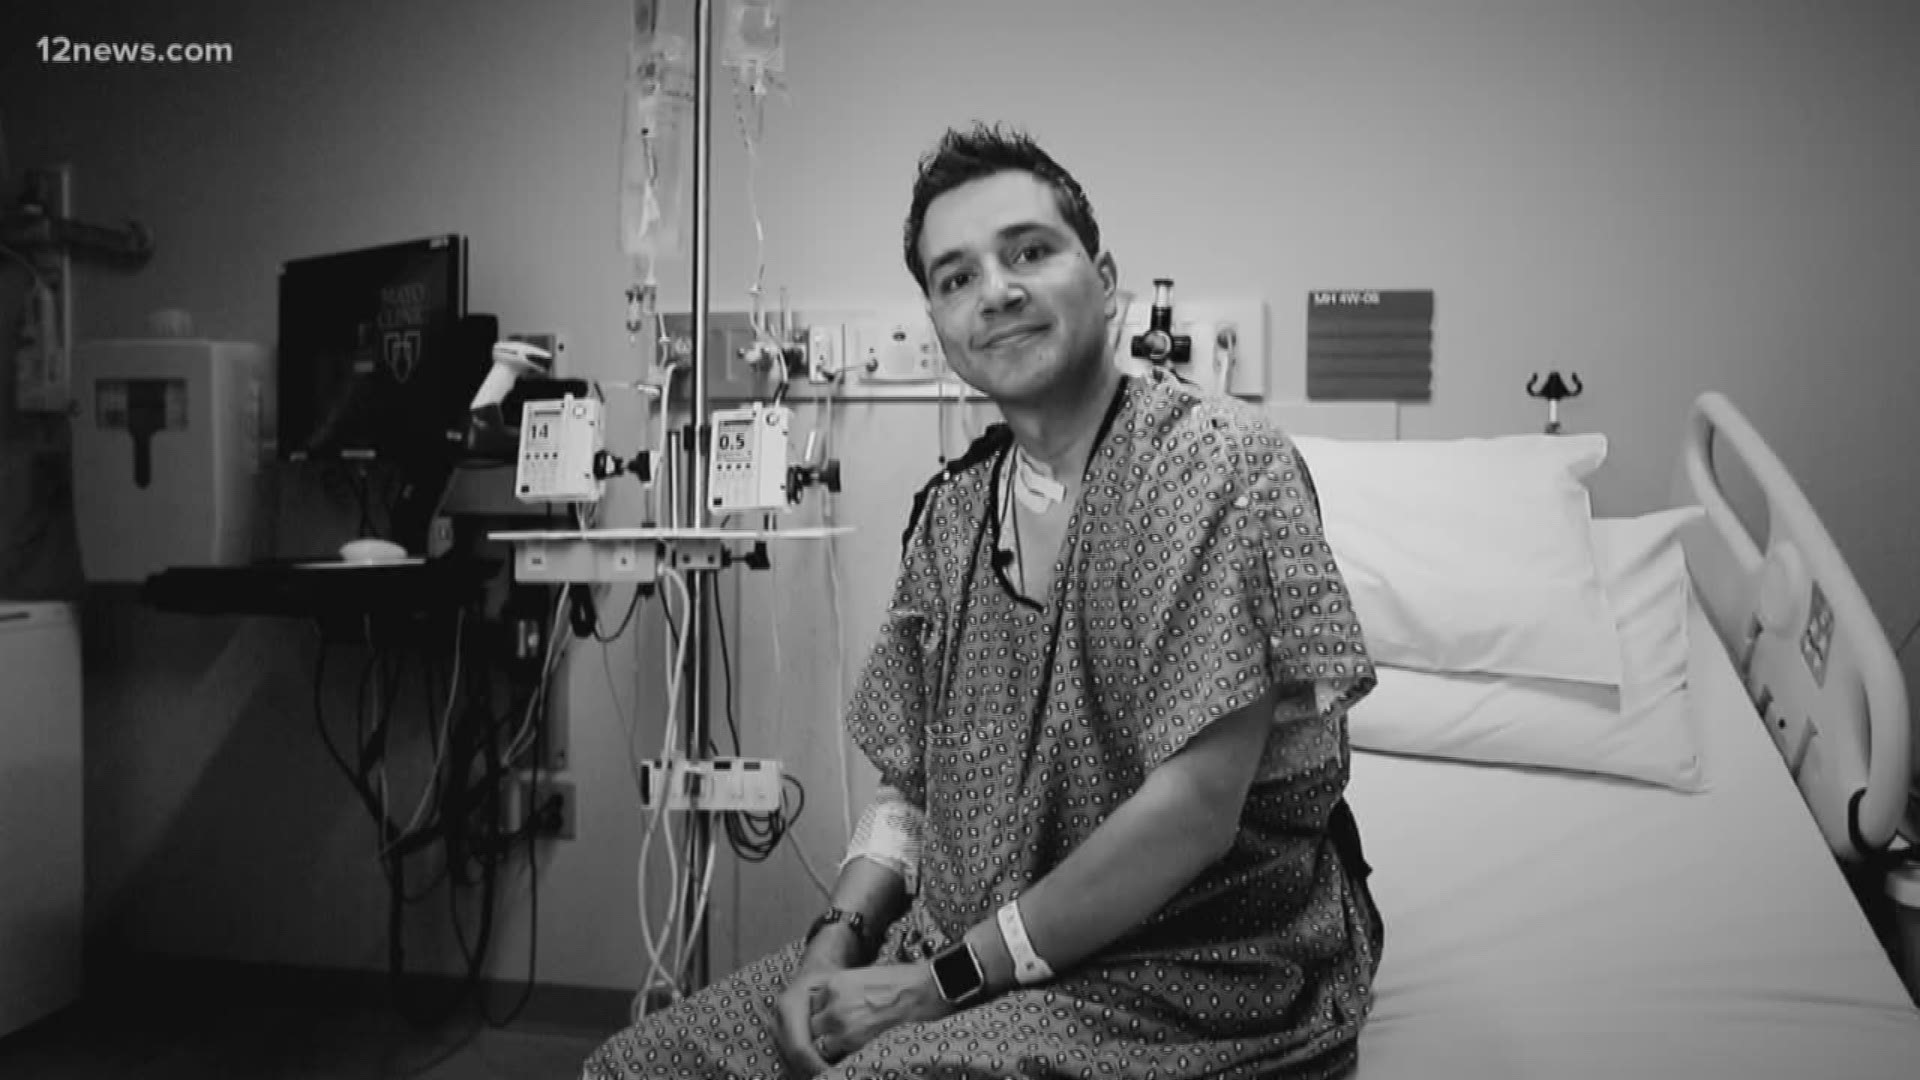 Ruben Aispuro is on the transplant list waiting for a heart, and has been for a few months. But Aispuro is not alone. Thousands of people are waiting on life-saving organ donations.